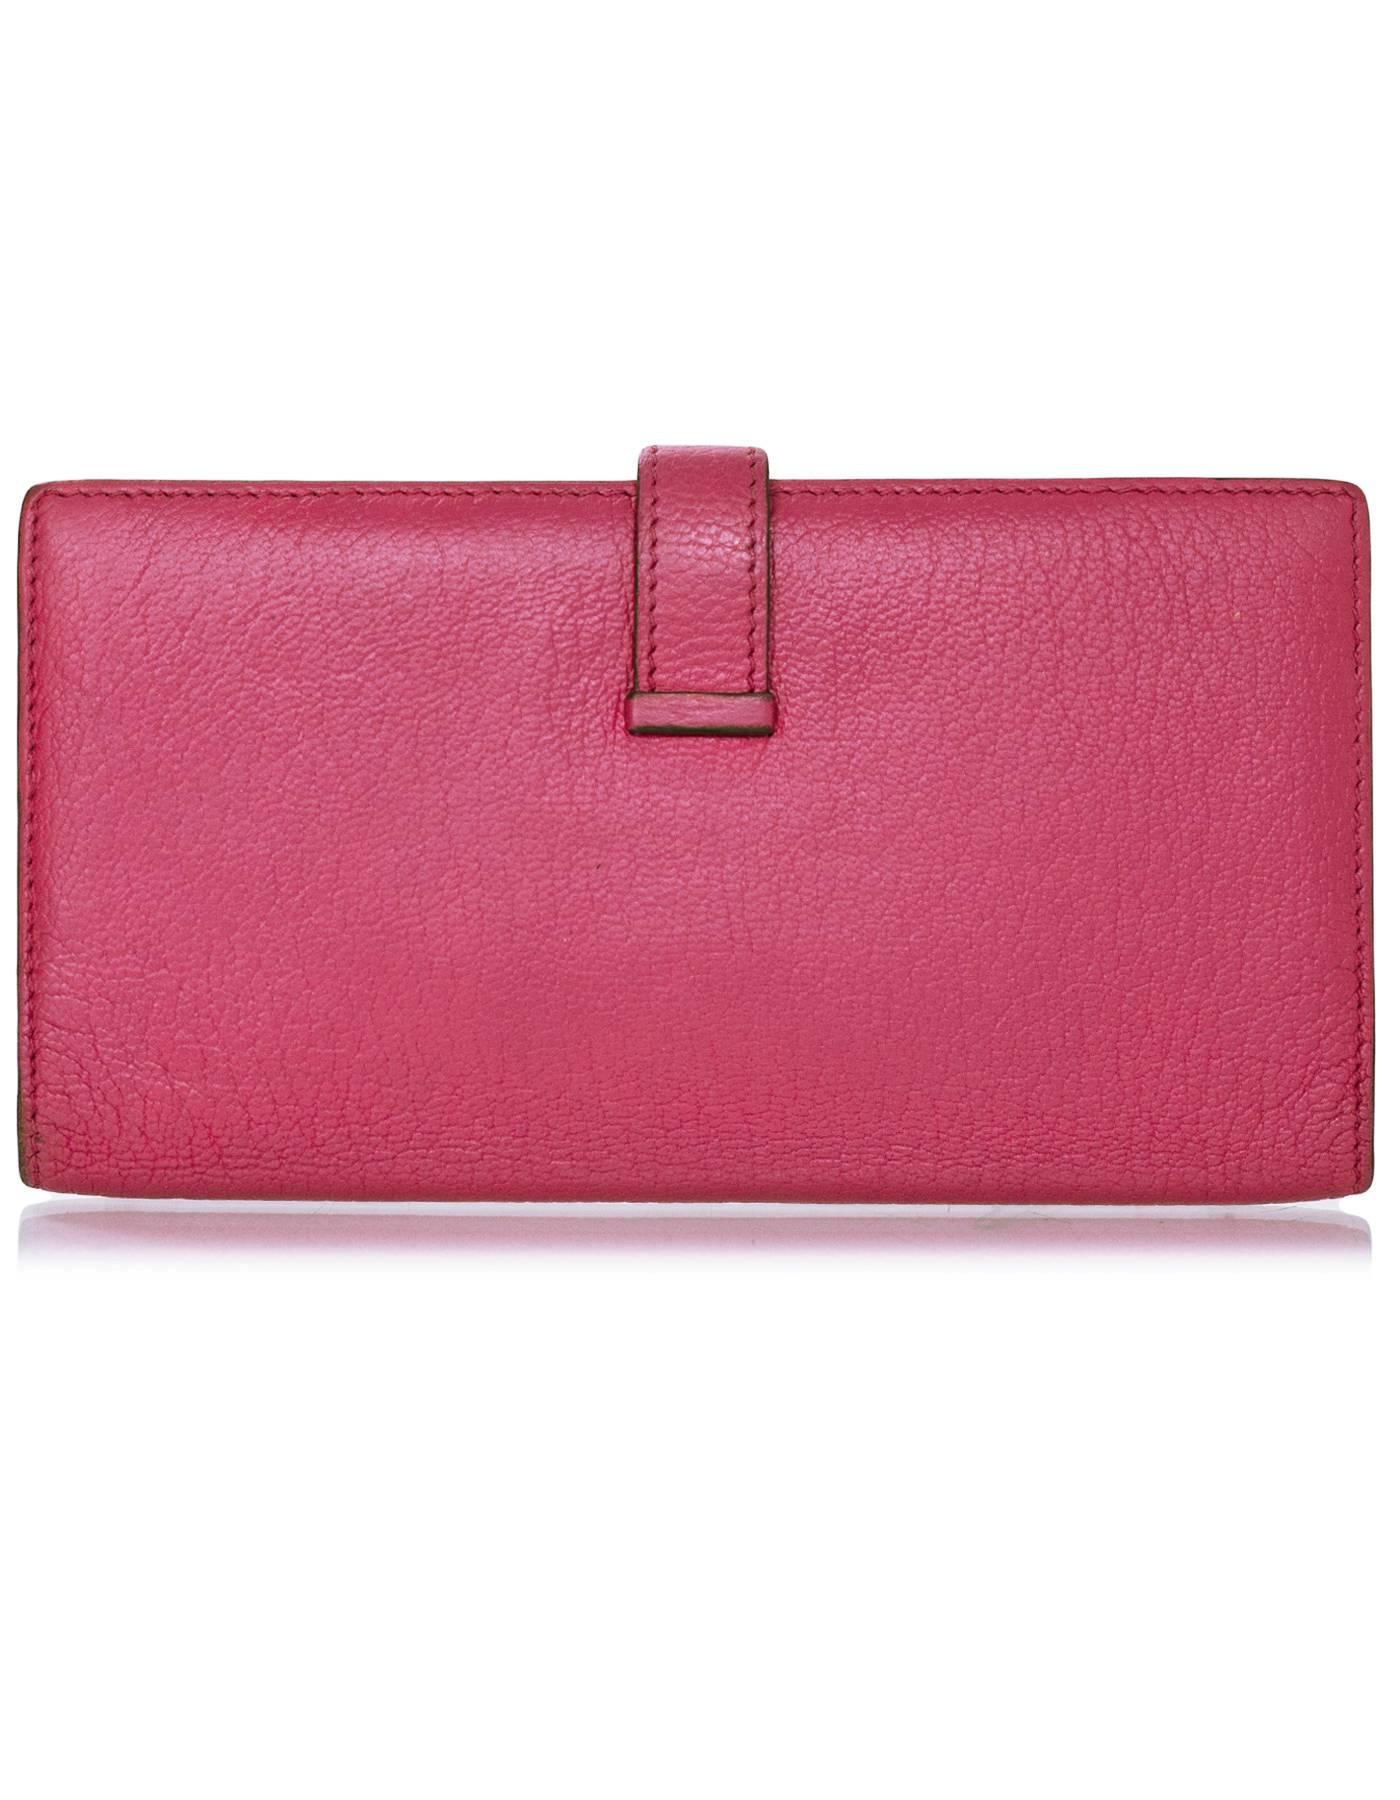 Hermes Rose Tyrien Chevre Mysore Leather Bearn Wallet

Made In: France
Year of Production: 2010
Color: Rose Tyrien
Hardware: Palladium
Materials: Chevre leather
Lining: Rose leather
Closure/Opening: Bi-fold with H tab closure
Exterior Pockets: